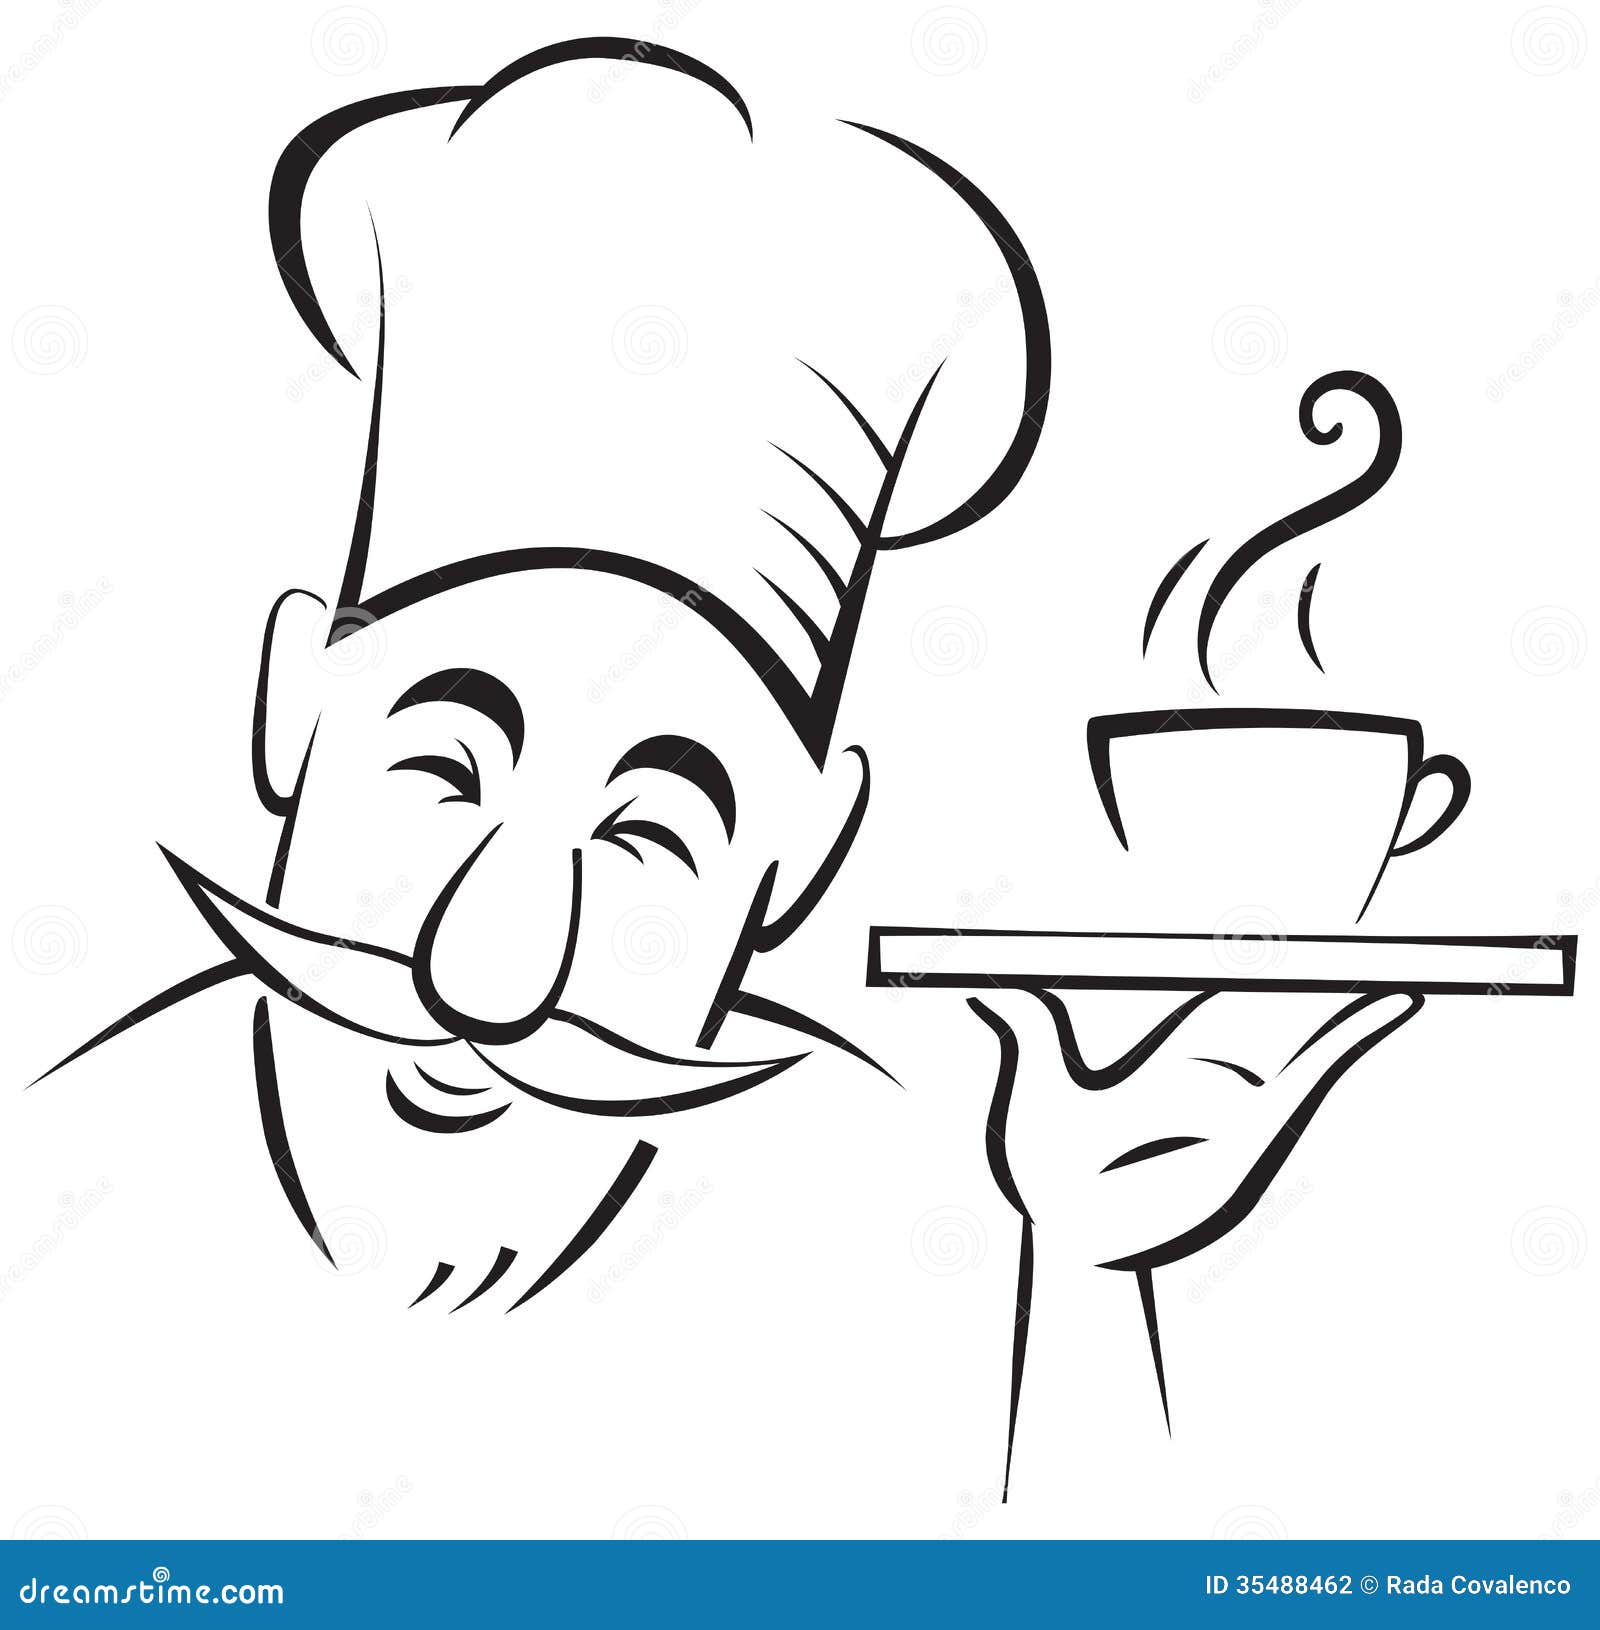 Chef cook contour stock vector. Illustration of line - 35488462